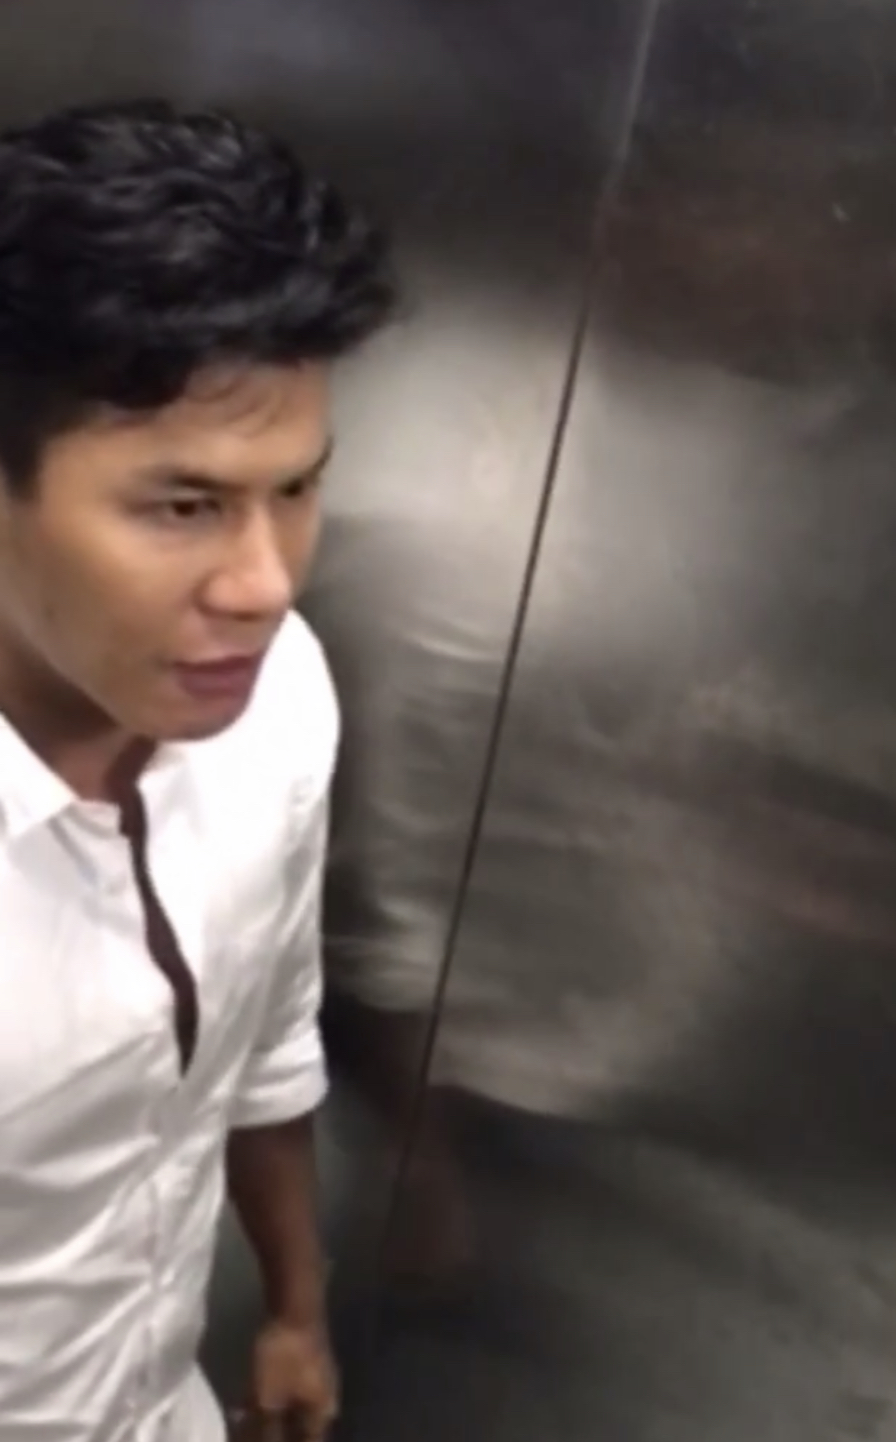 Singapore handsome men blowjob in toilet cubicle pic